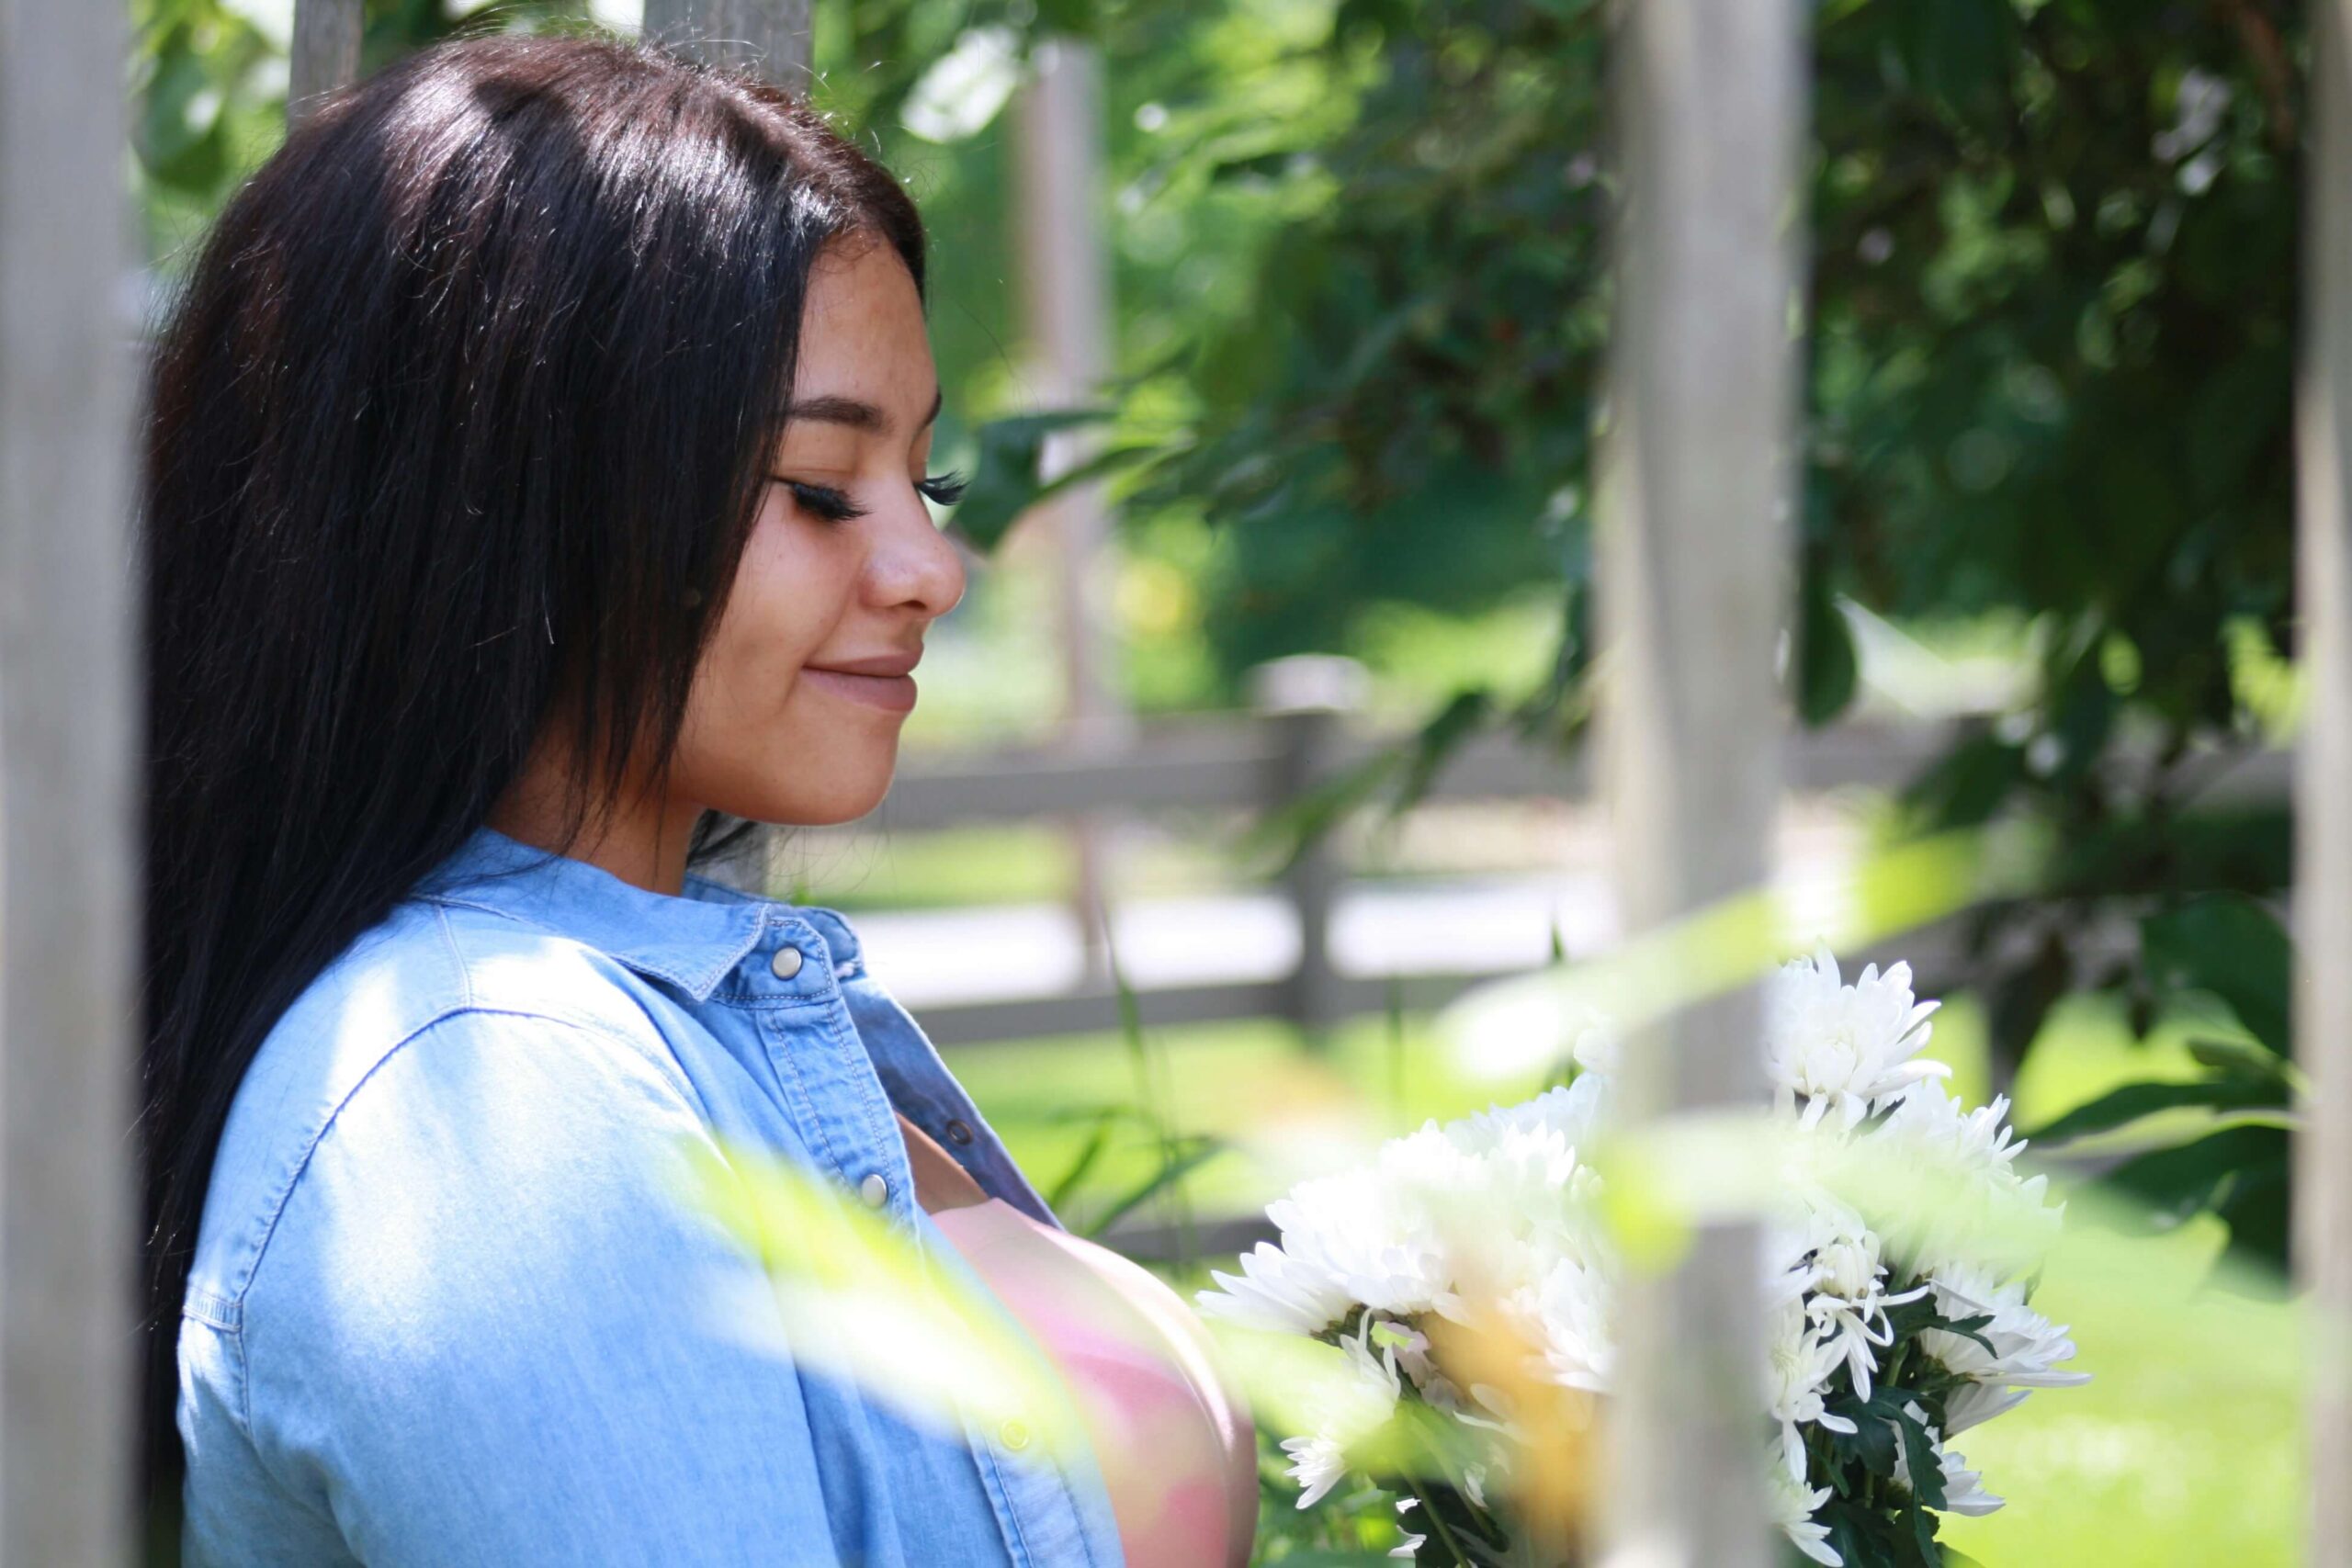 A beautiful black woman holding white flowers. Get started with anxiety counseling in NYC, NY today! Our anxiety therapists can help you with life transitions.